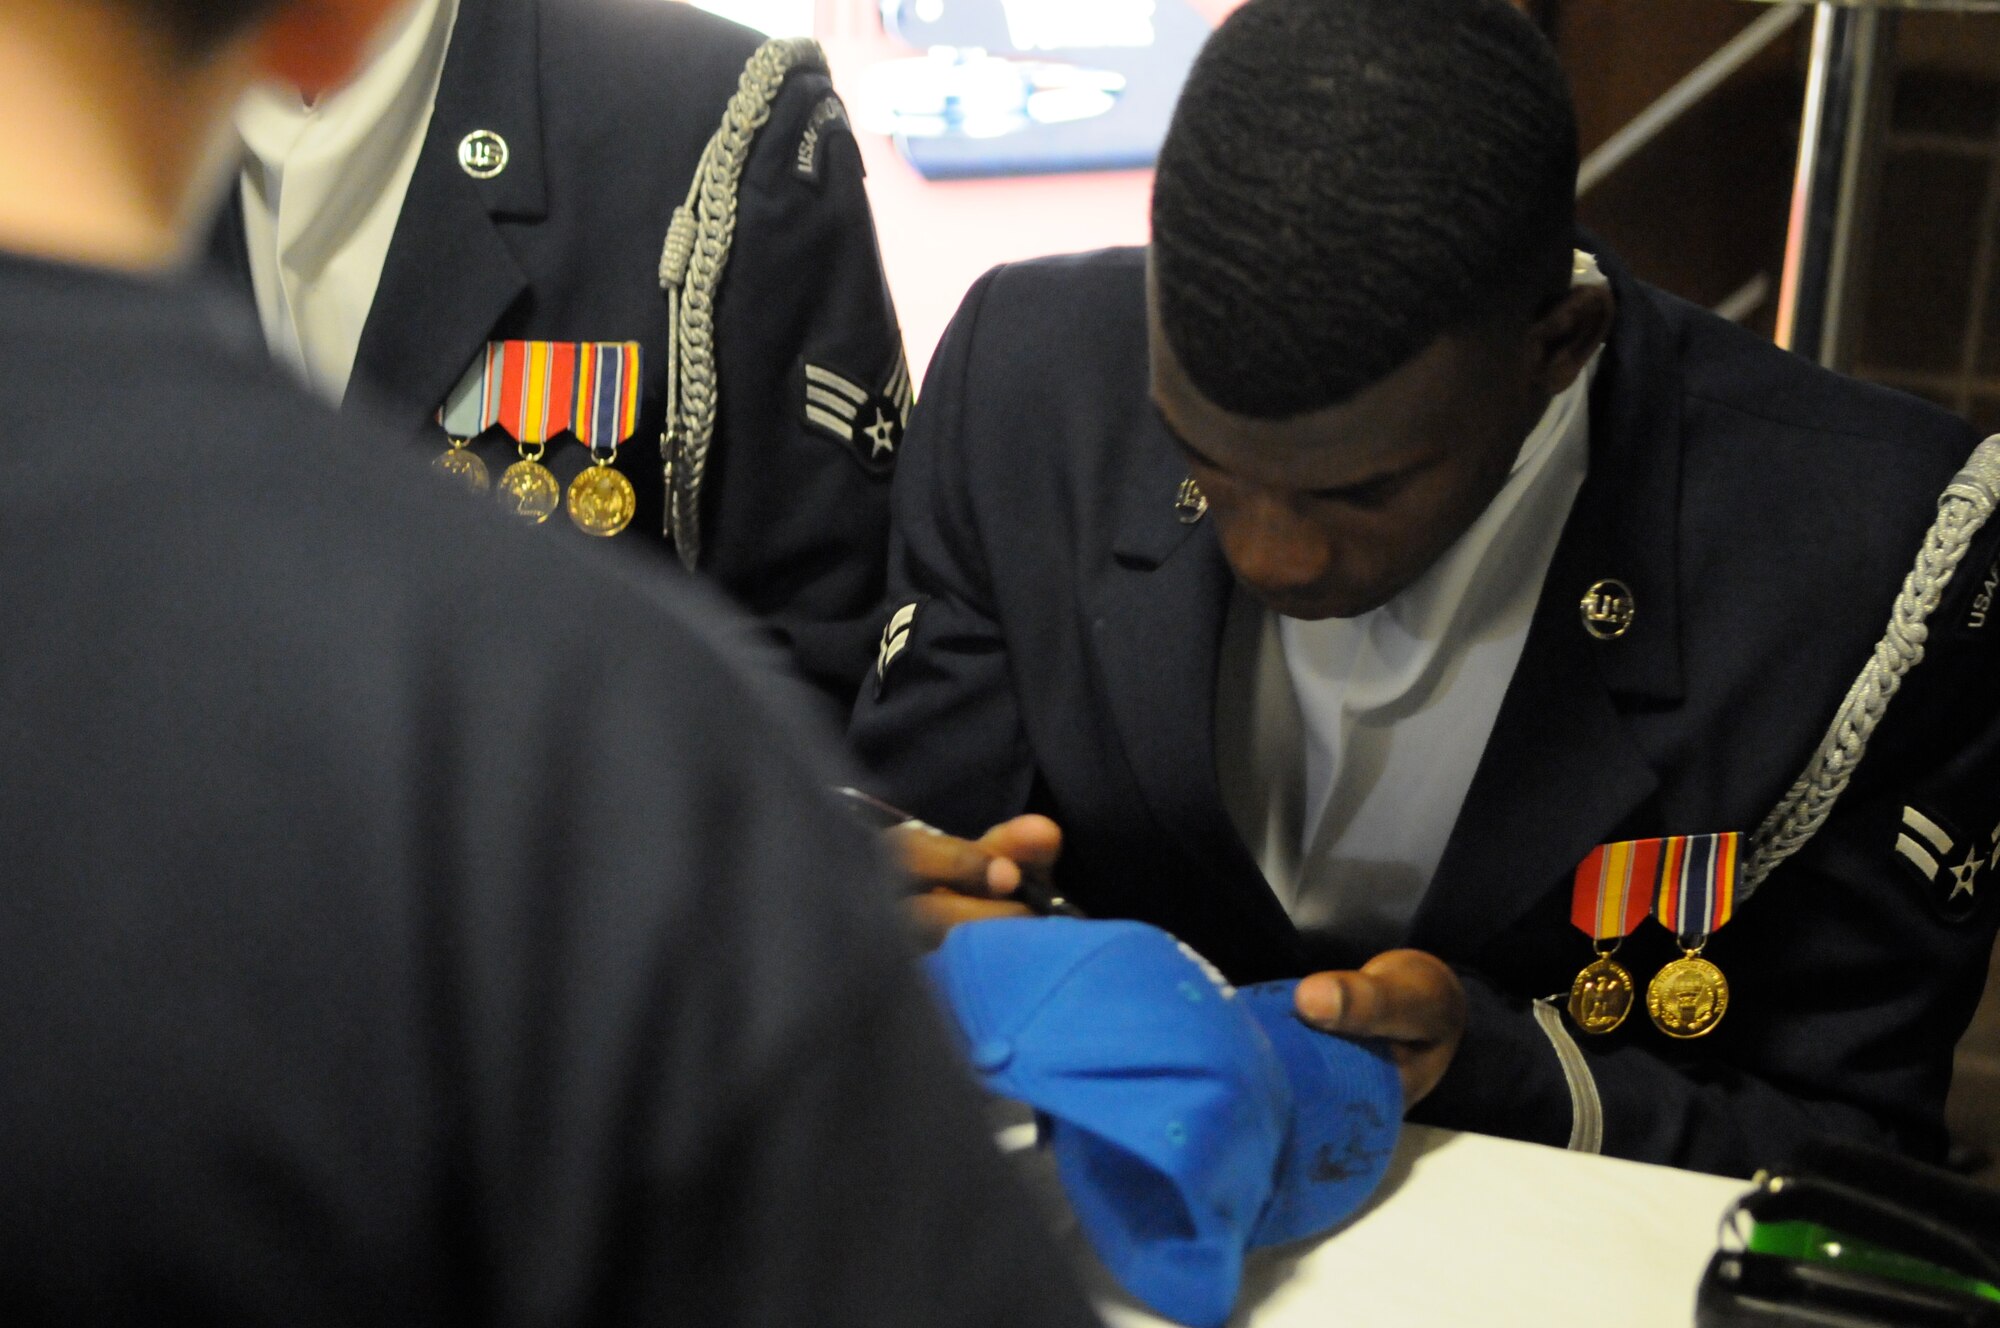 Airman 1st Class Billy Degraffenreid Jr., member of The U.S. Air Force Honor Guard drill team, signs his autograph Feb. 15 at the Oklahoma City Thunder stadium during military appreciation night. The drill team performed the halftime show during the game, representing service members for military appreciation night. (U.S. Air Force photo by Airman 1st Class Tabitha N. Haynes)